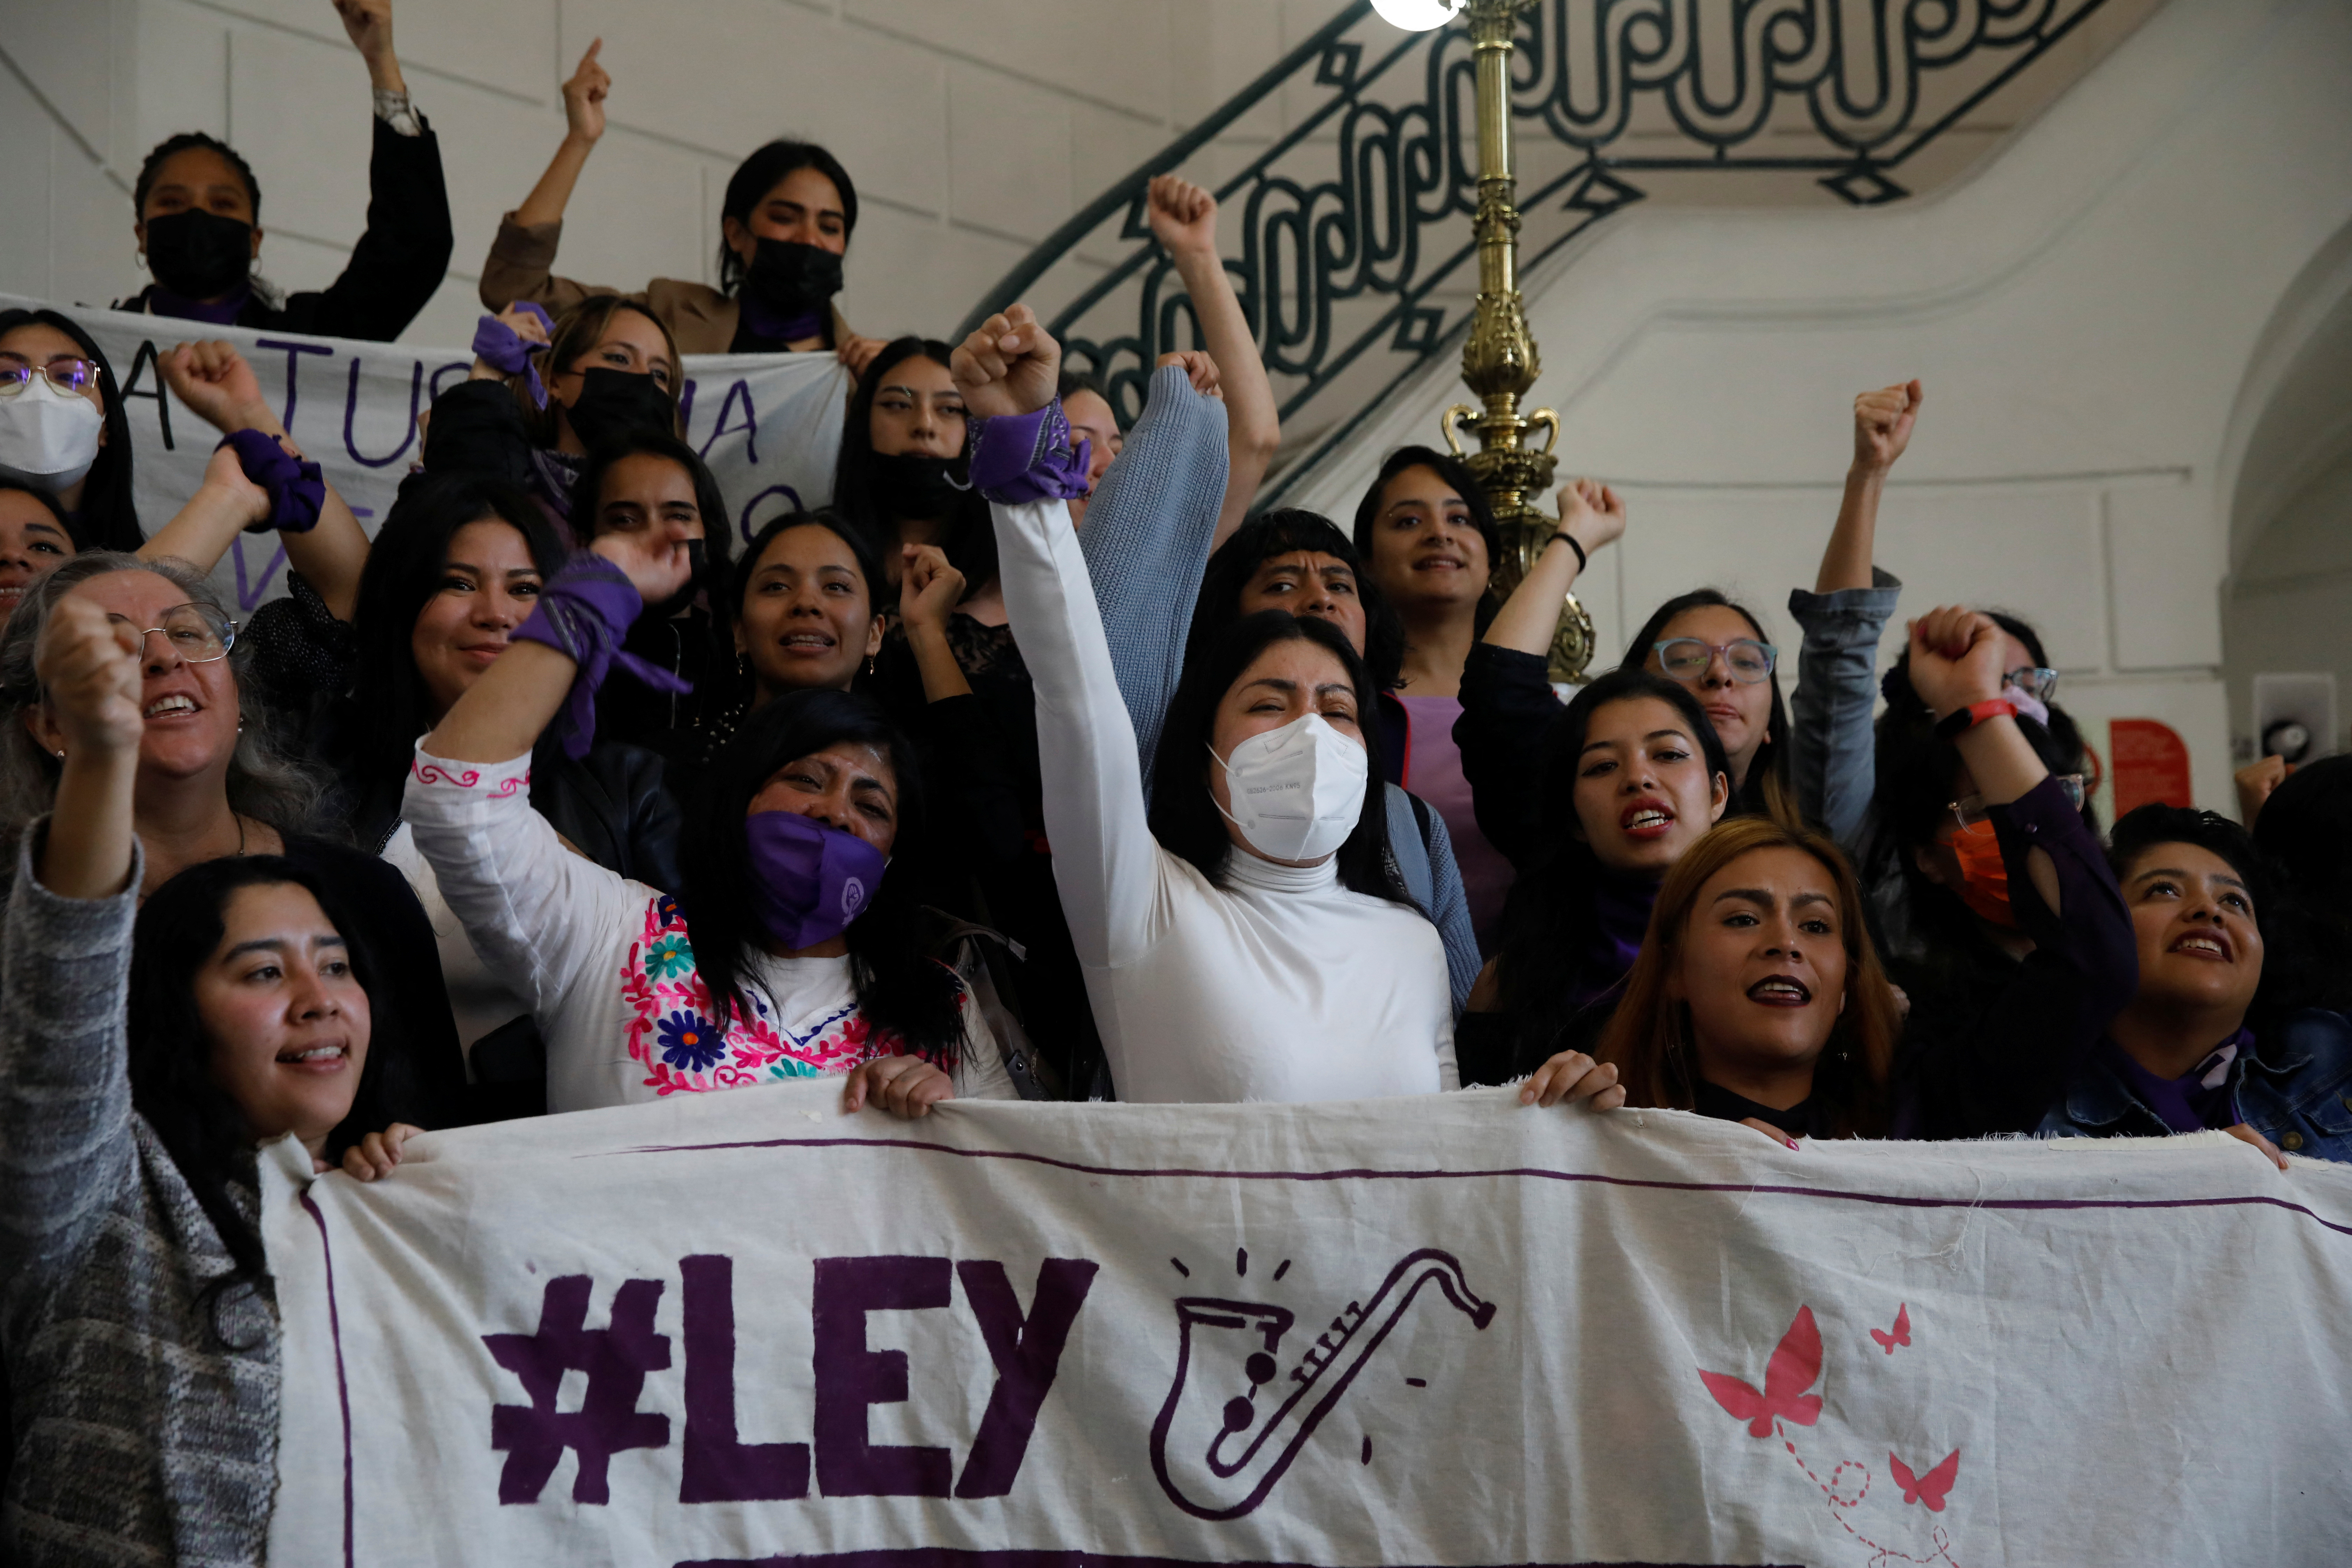 "Ley Malena" to classify cases of acid violence against women as feminicide in Mexico City